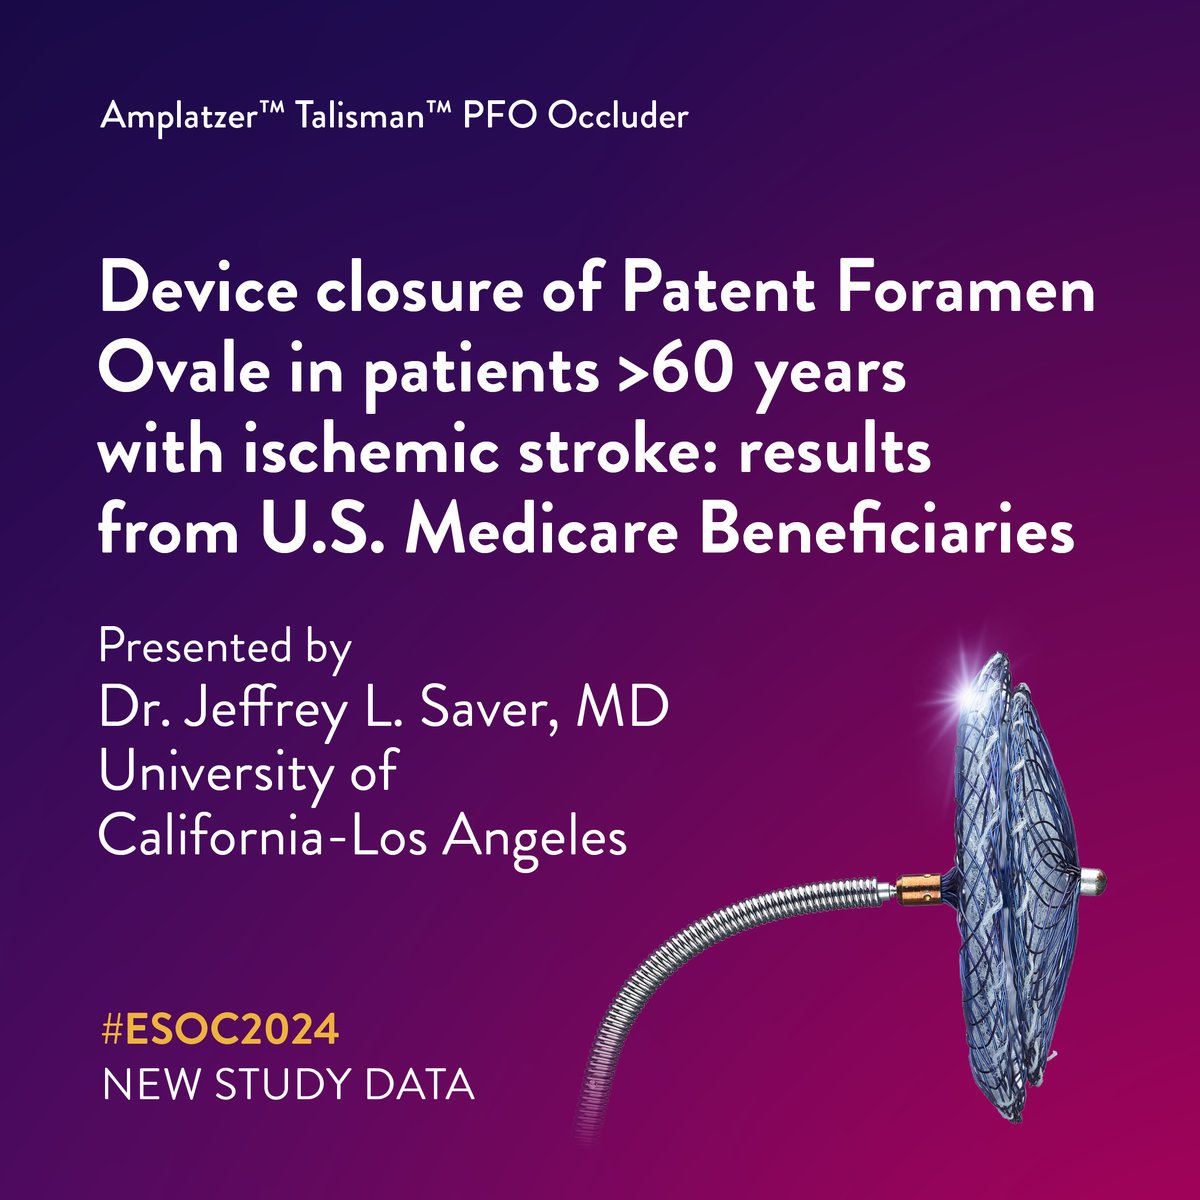 Join us at #ESOC2024 for results from the largest comparative study of closure vs. non-closure in patients over 60 years with presumed PFO-associated #Stroke. Learn more about our #Amplatzer #Talisman PFO Occluder: abbo.tt/PFOOccluder Safety Info: abbo.tt/AmplatzerTalis…